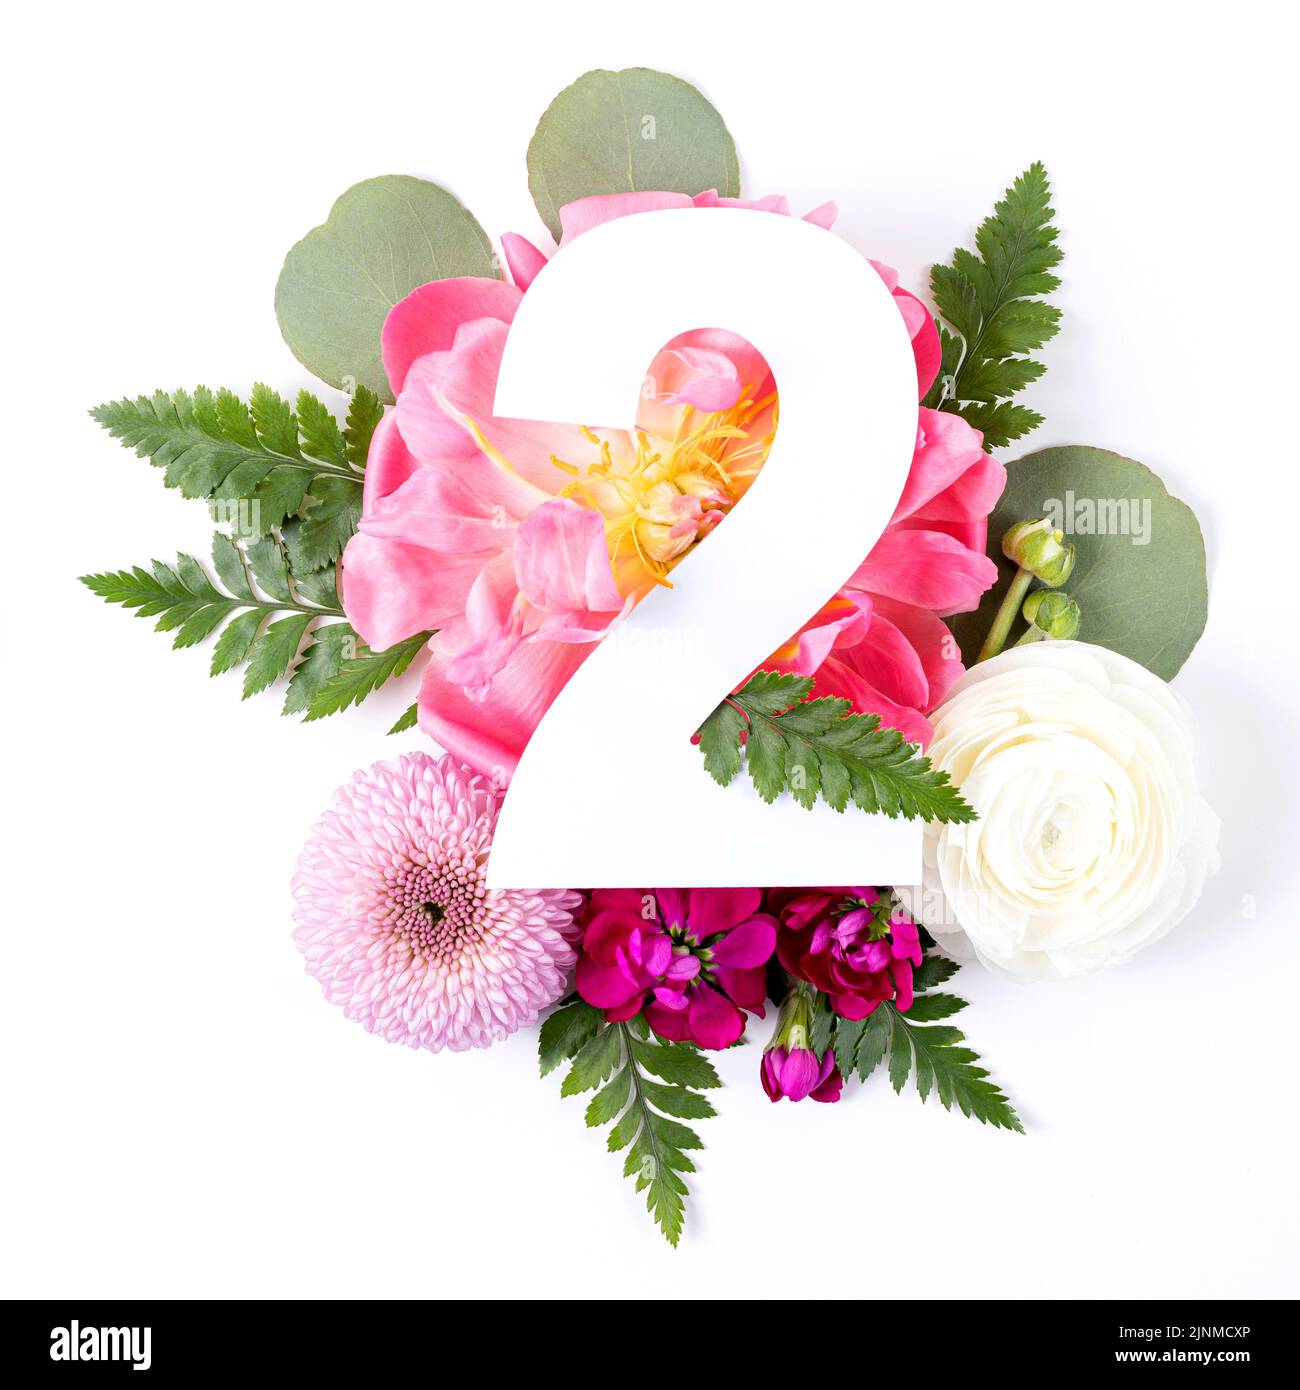 Creative layout with colorful flowers, leaves and number two isolated on white background. Anniversary concept. Flat lay. Stock Photo